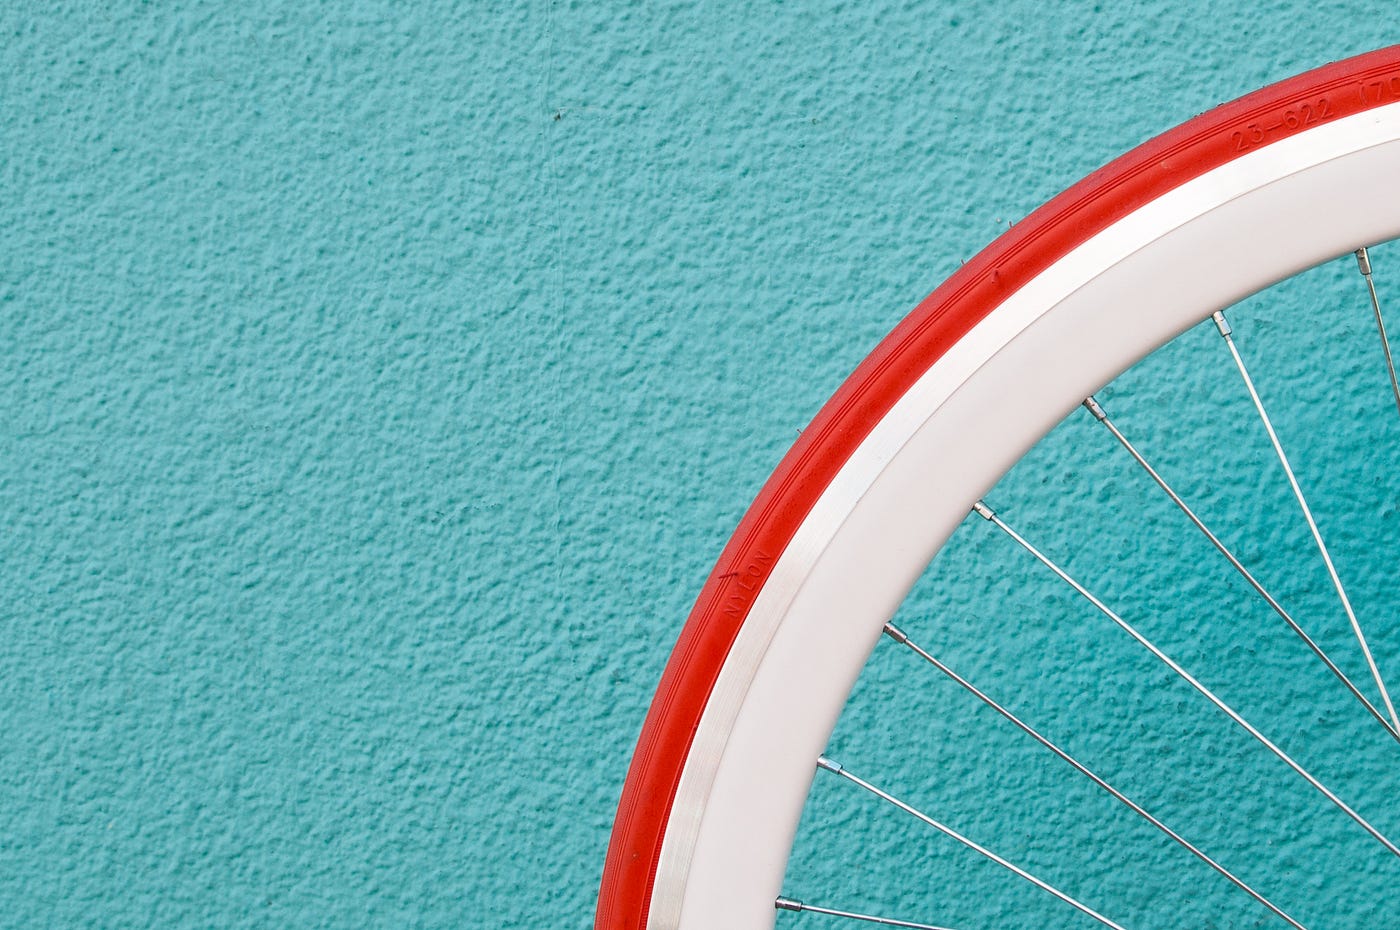 We see the upper rear part of a bicycle tire, with the rim white with a red border. There is a light blye textured background.